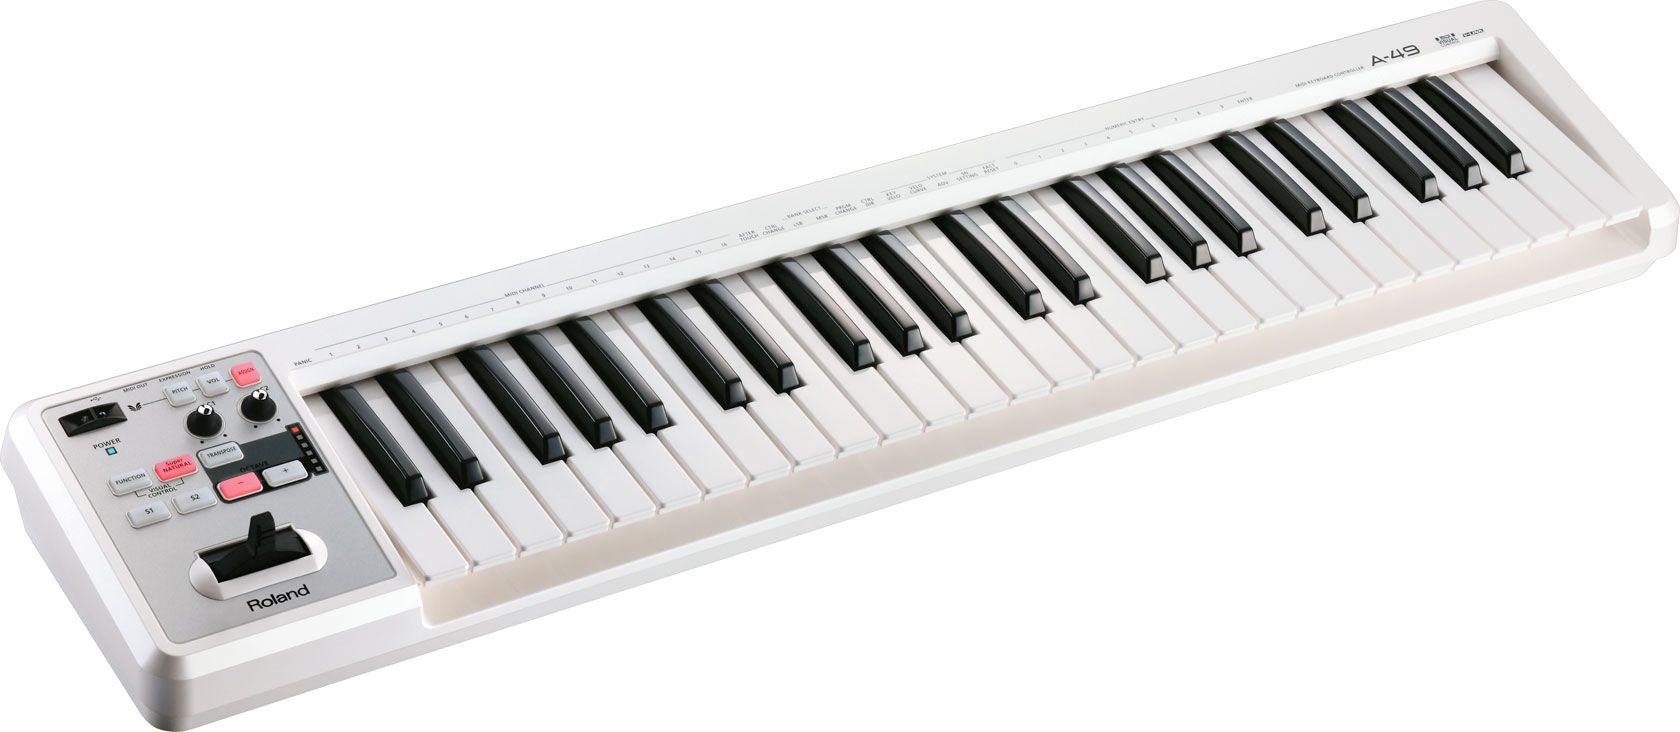 A product shot of the Roland A-49 MIDI keyboard in white. As the name suggests it has 49 keys and has a number of buttons and knobs on the left hand side.